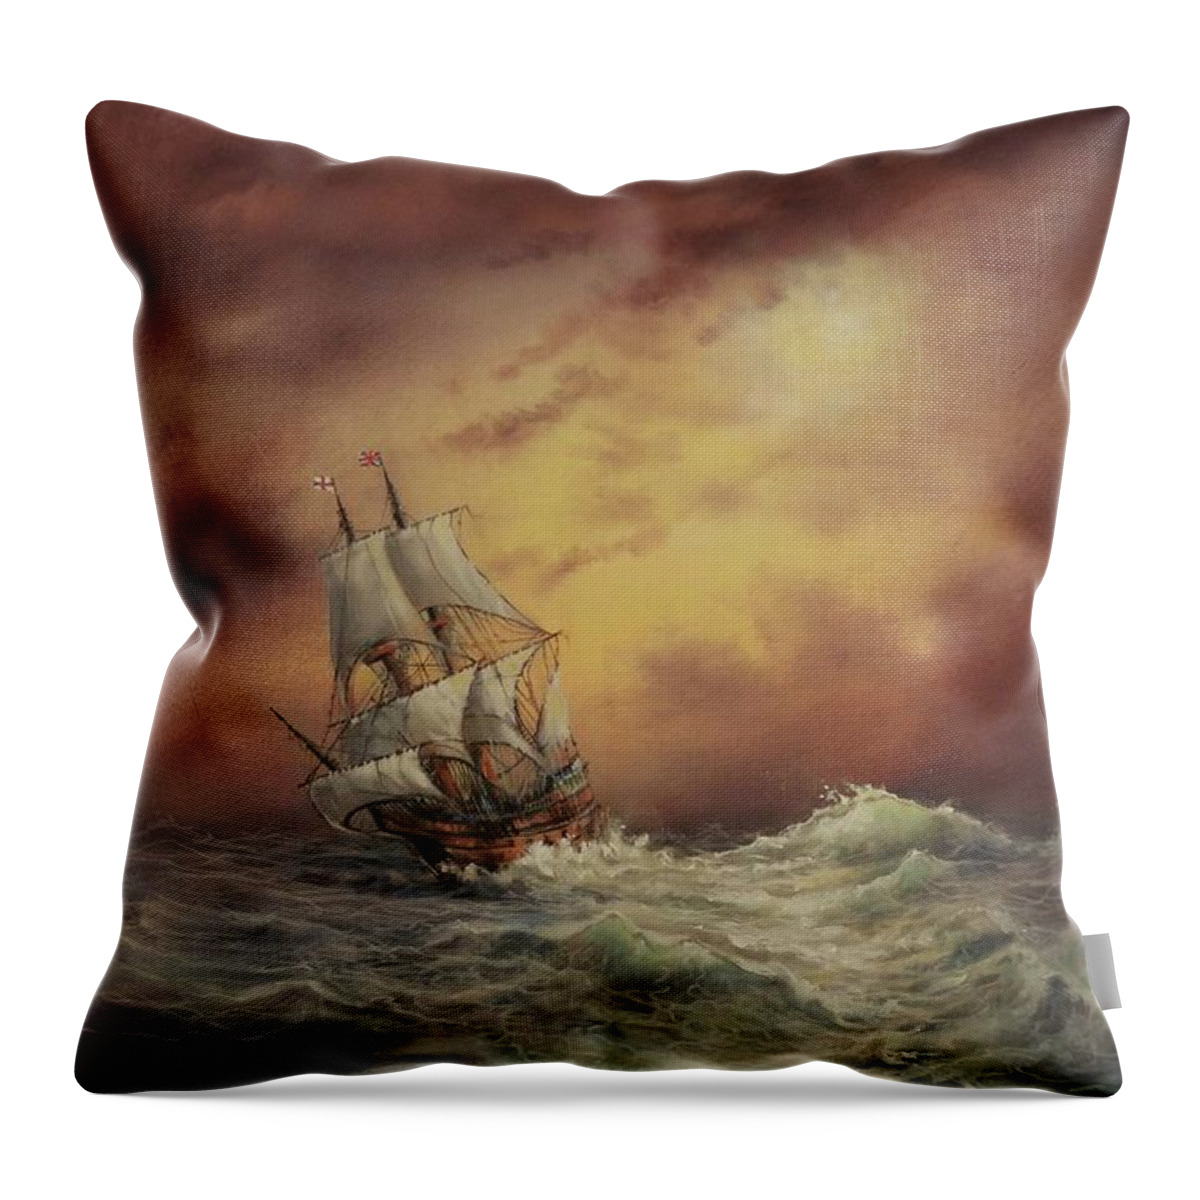 Mayflower Throw Pillow featuring the painting Mayflower At Sea by Tom Shropshire